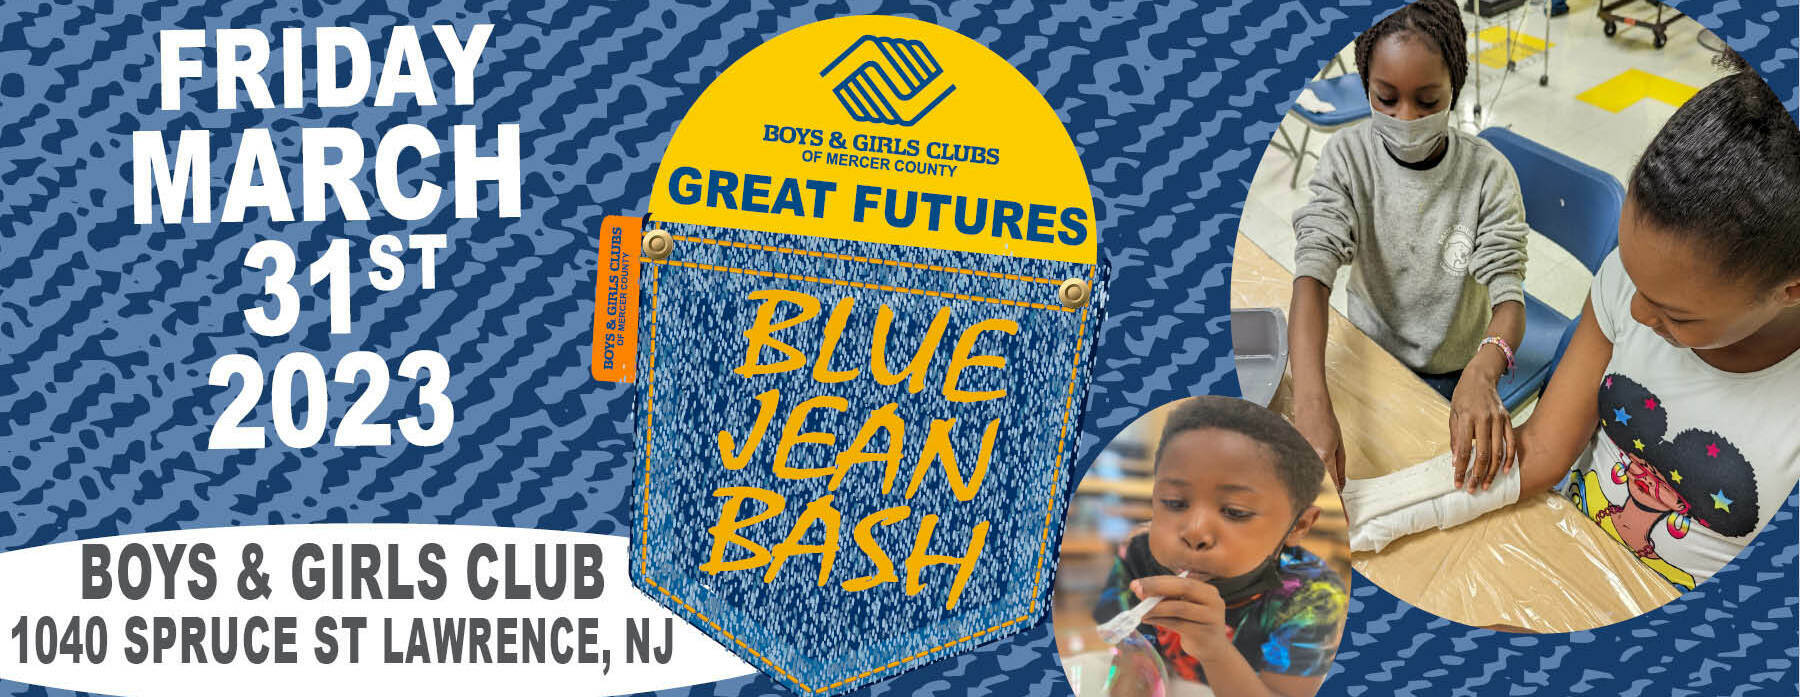 Great Futures BLUE JEAN BASH